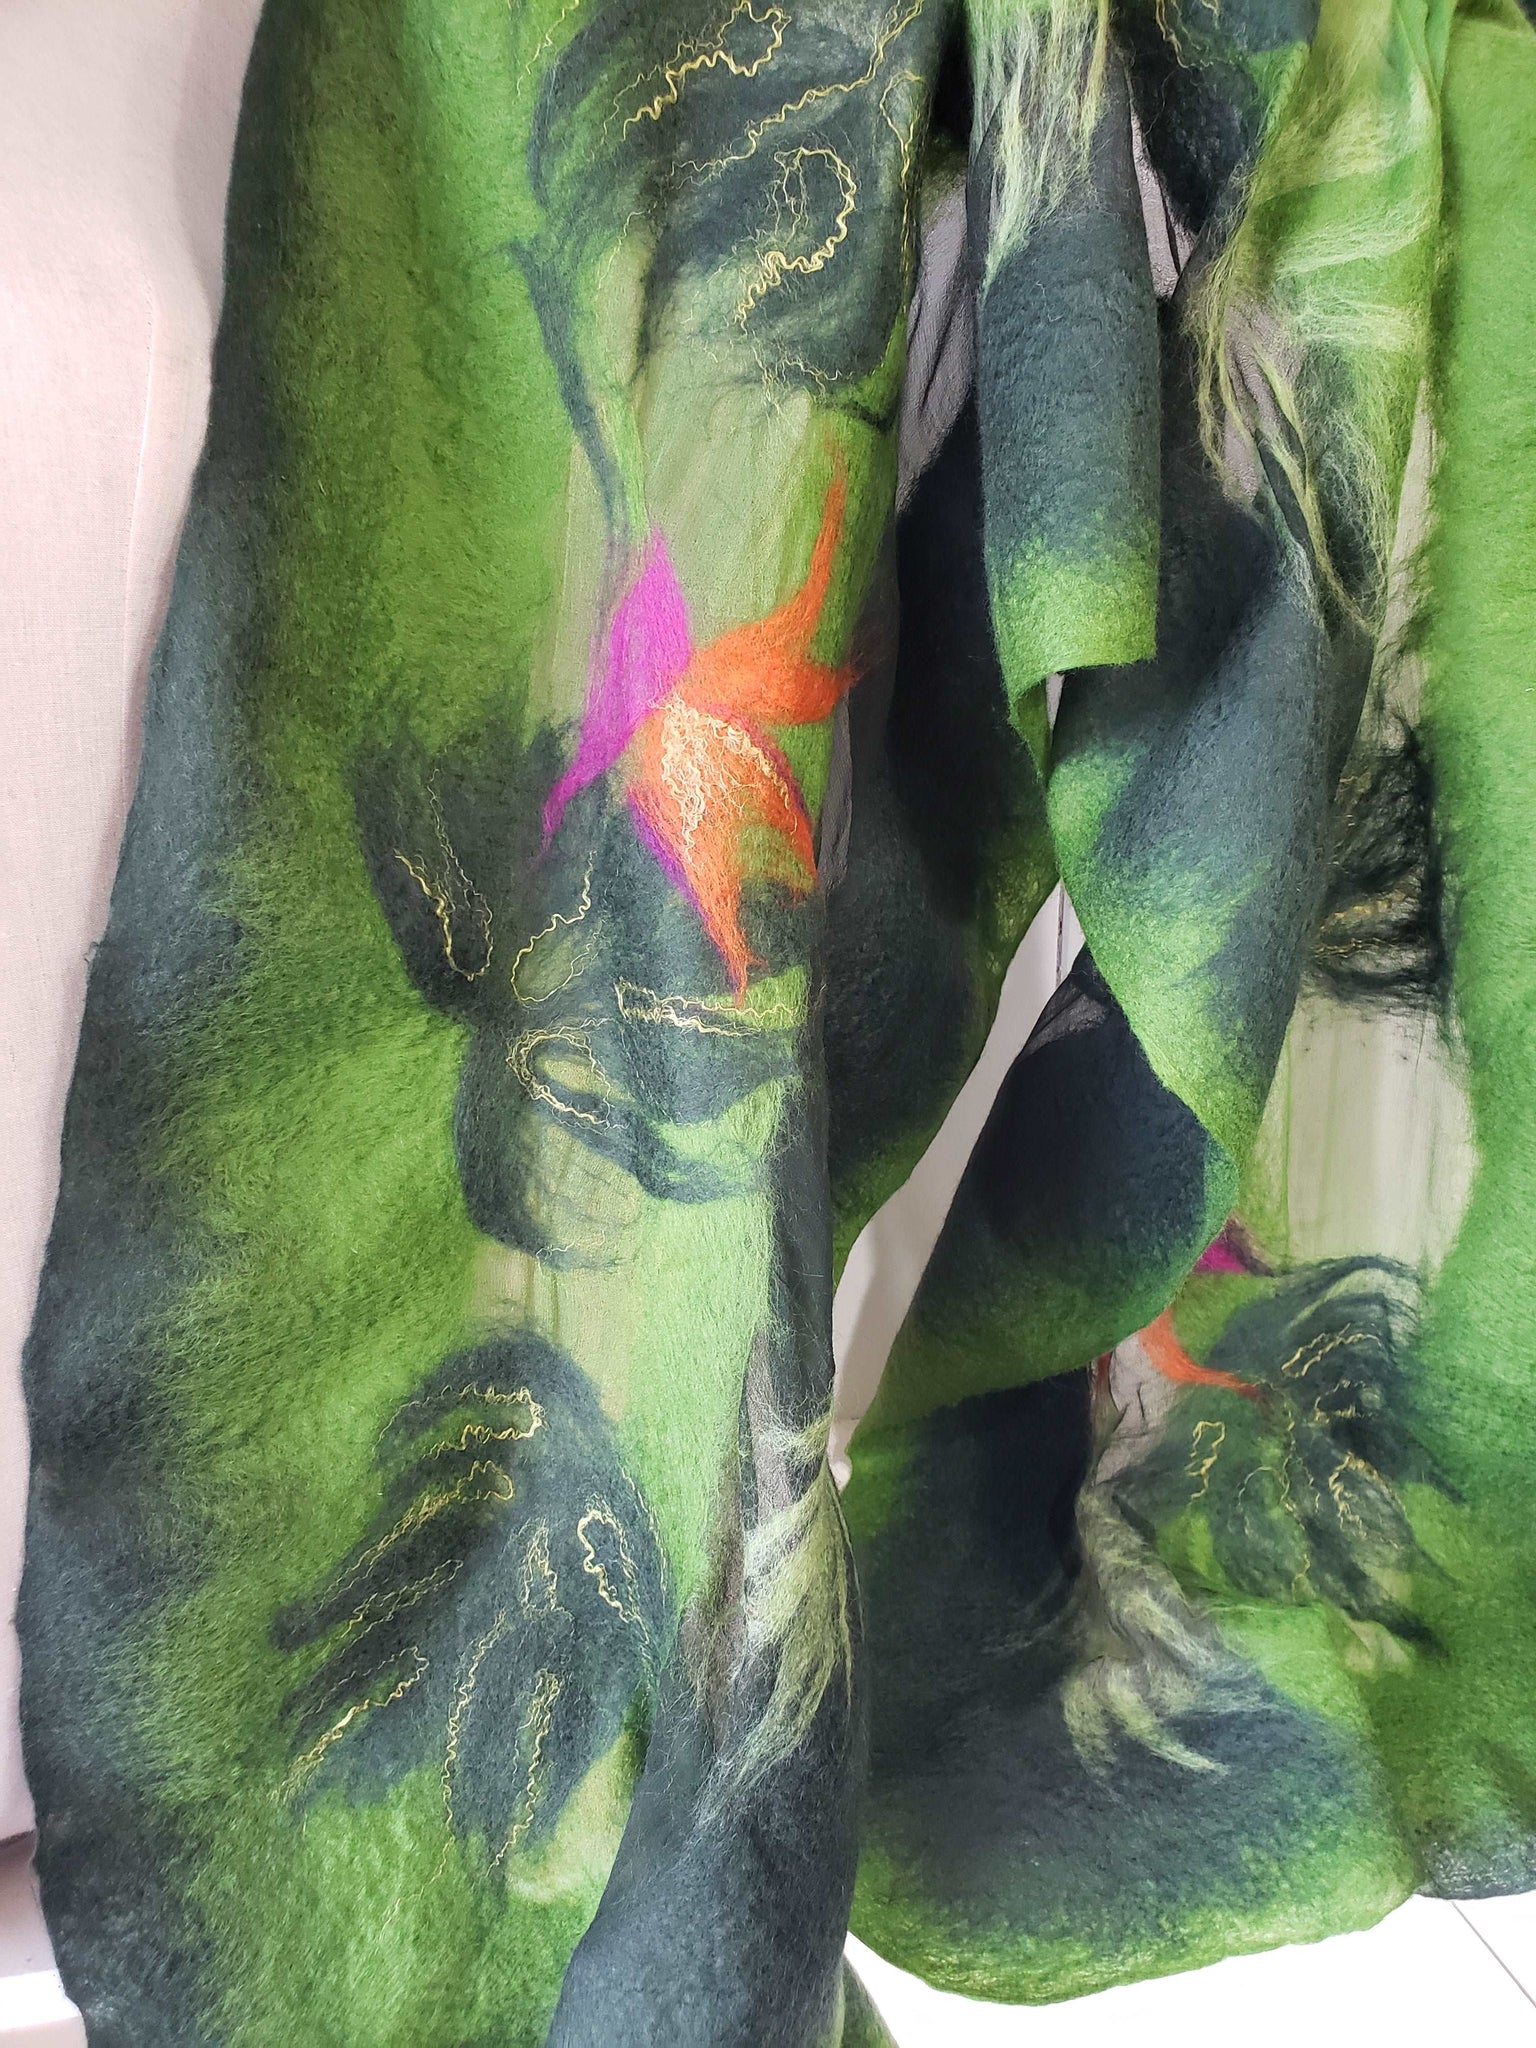 Monstera Tropical leaf with exotic flower, scarf merino & silk, forest green, orange accent.